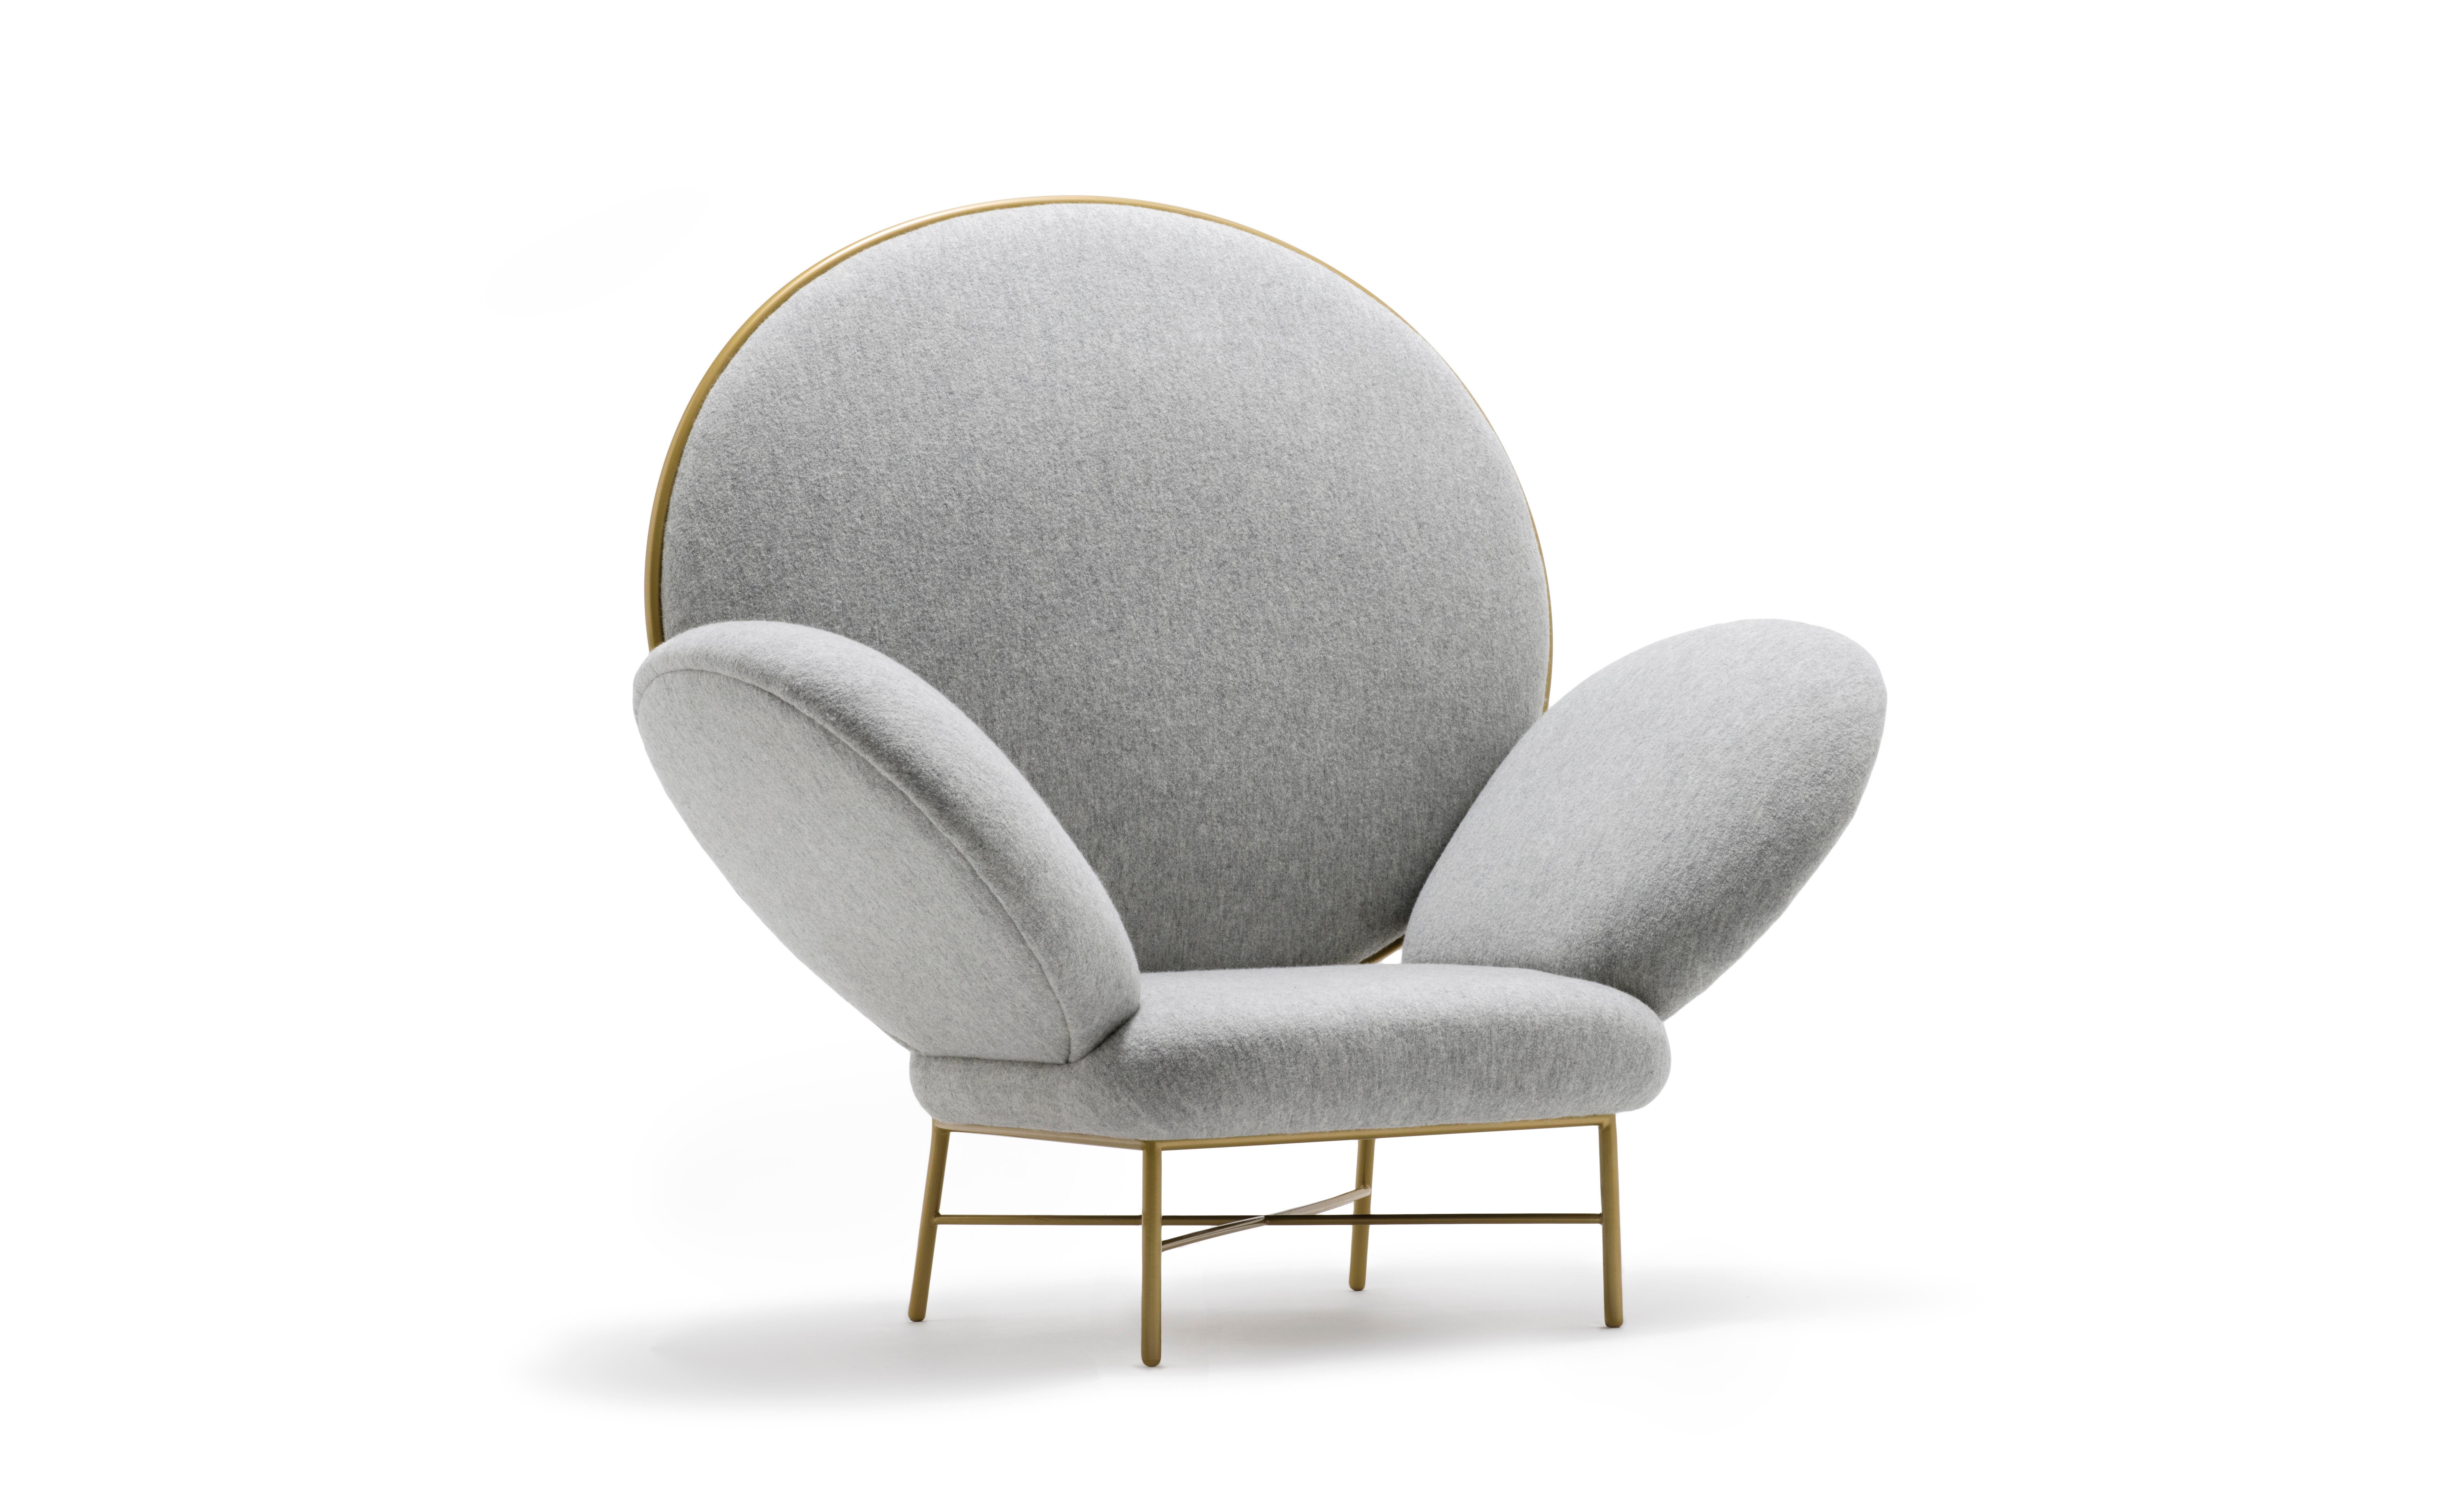 Contemporary ivory upholstered armchair - stay Armchair by Nika Zupanc for Se.

Design: Nika Zupanc
Frame upholstered in Holland & Sherry Chamonix (Color Smoke) fabric. Available also in a choice of leathers or fabrics, or in customer’s own